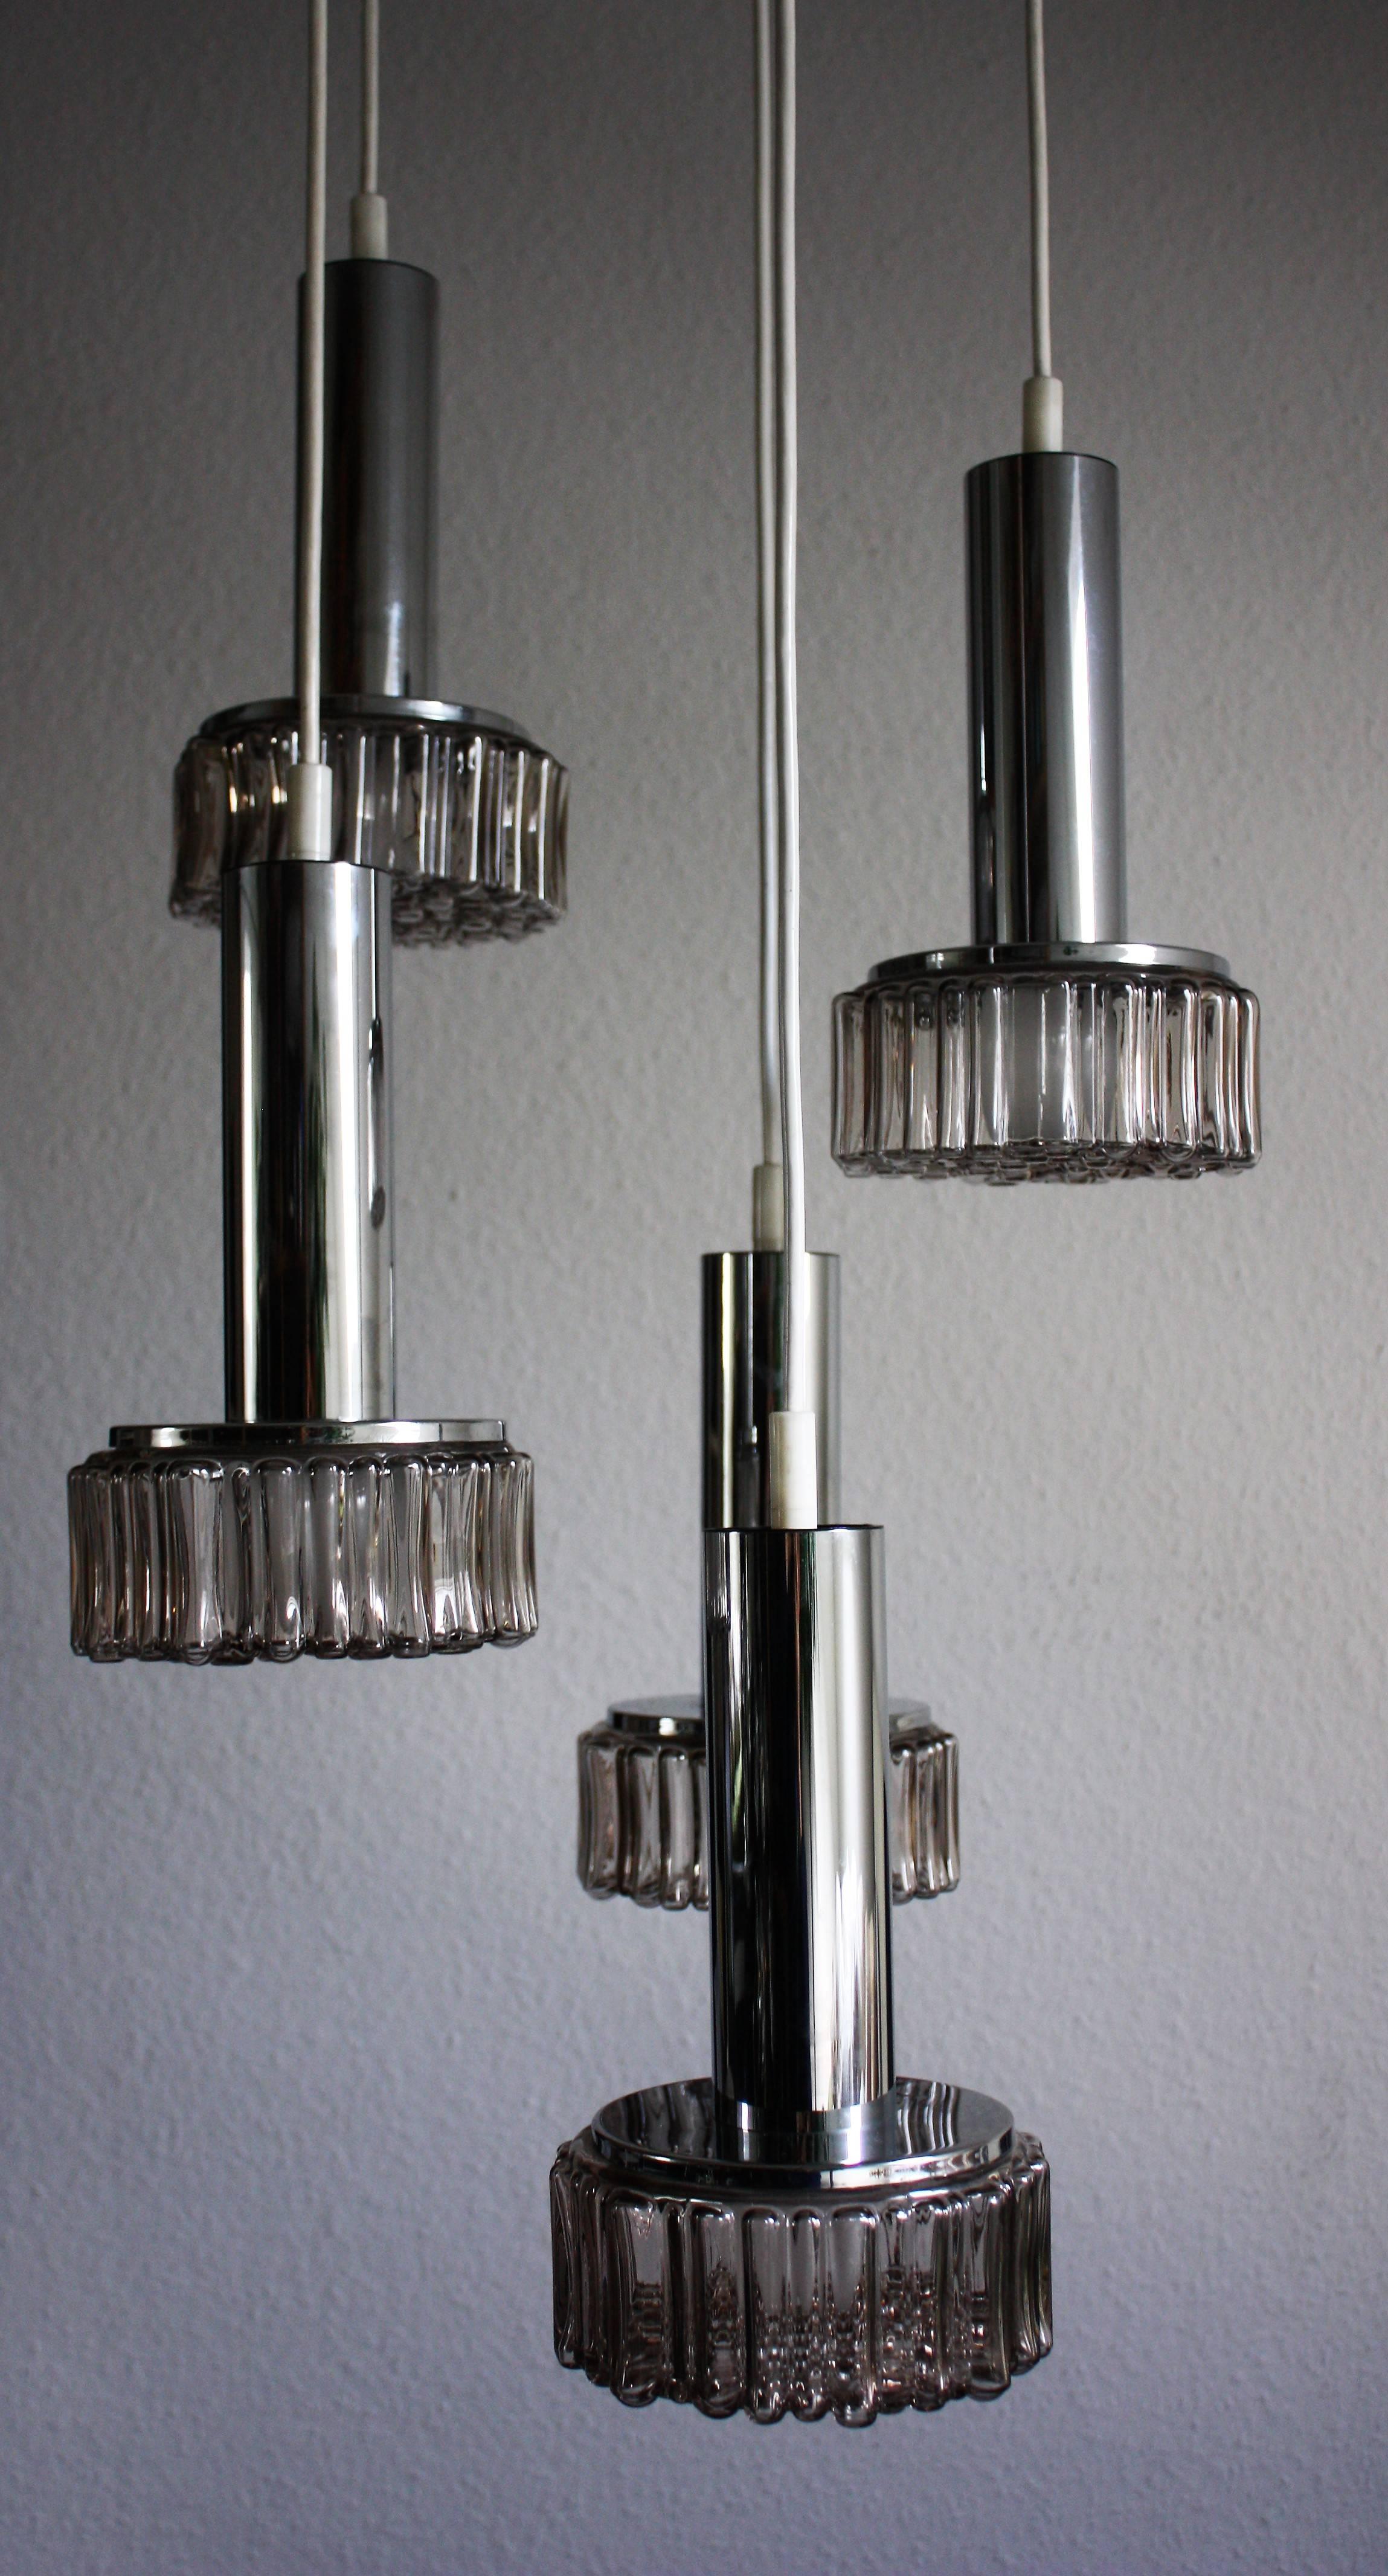 Large cascading five l-light pendant chandelier by Staff, 1970s, Germany.
Crystal bubble shades on the nickeled steel frame.
Catalogue number 9026/5
Height can be customized.
Socket: 5 x e27 for standard screw bulbs
  